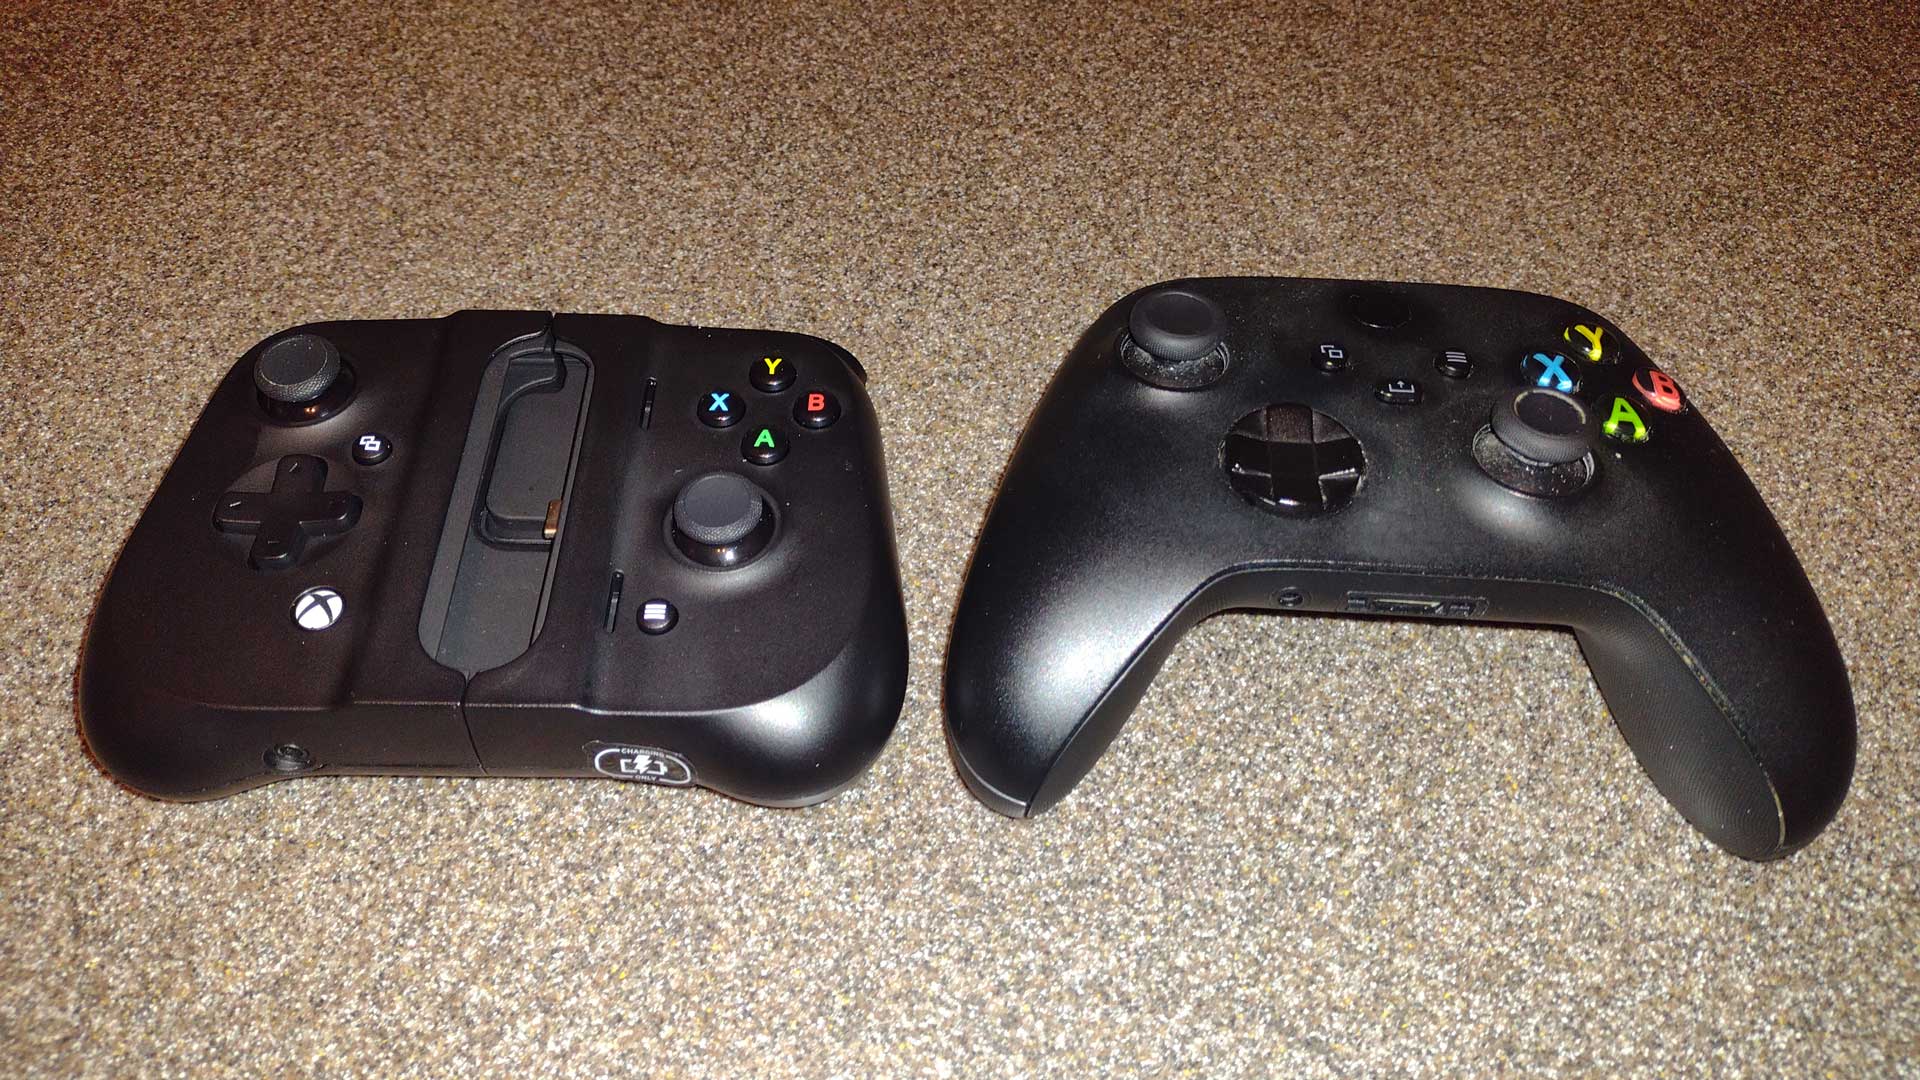 Gamevice Flex and Xbox Wireless Controller side by side